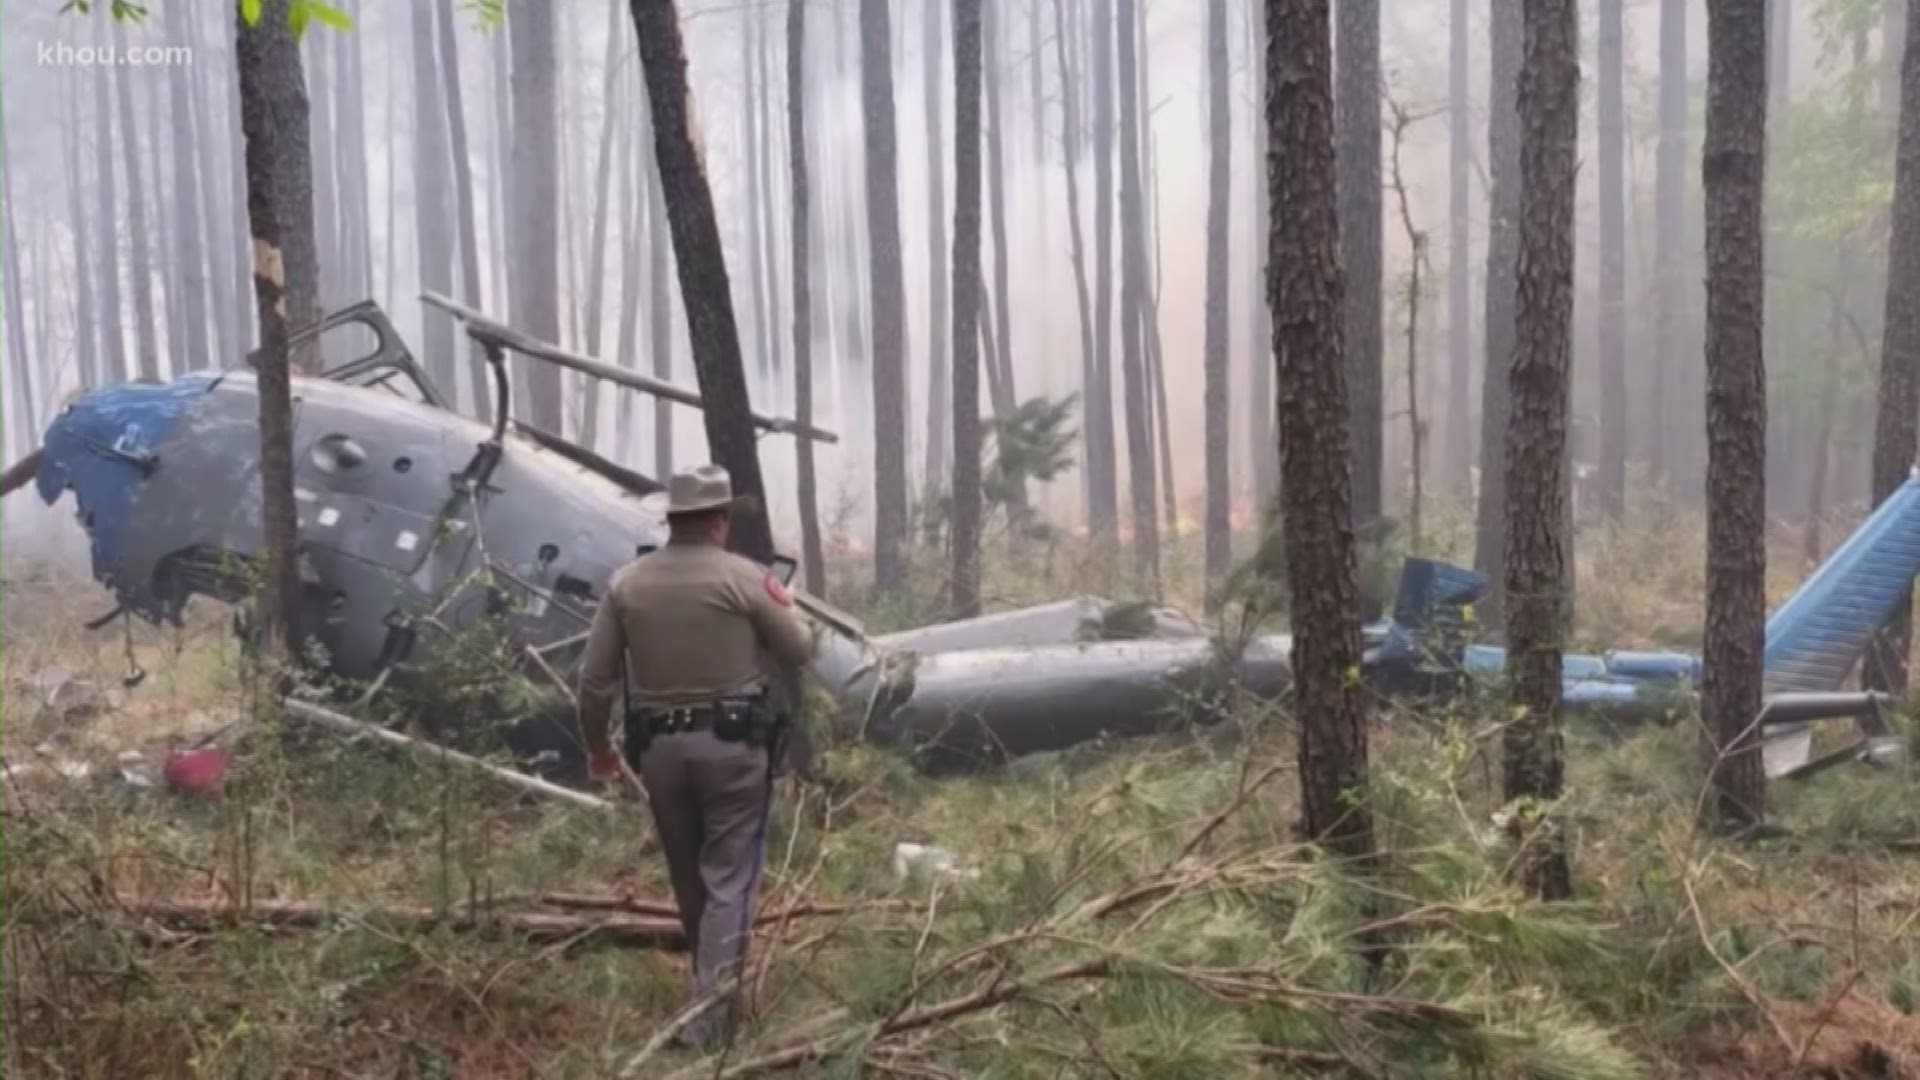 FAA and NTSB officials are investigating Wednesday's fatal helicopter crash in Montgomery County. The chopper is still deep in the woods in the Sam Houston National Forest.